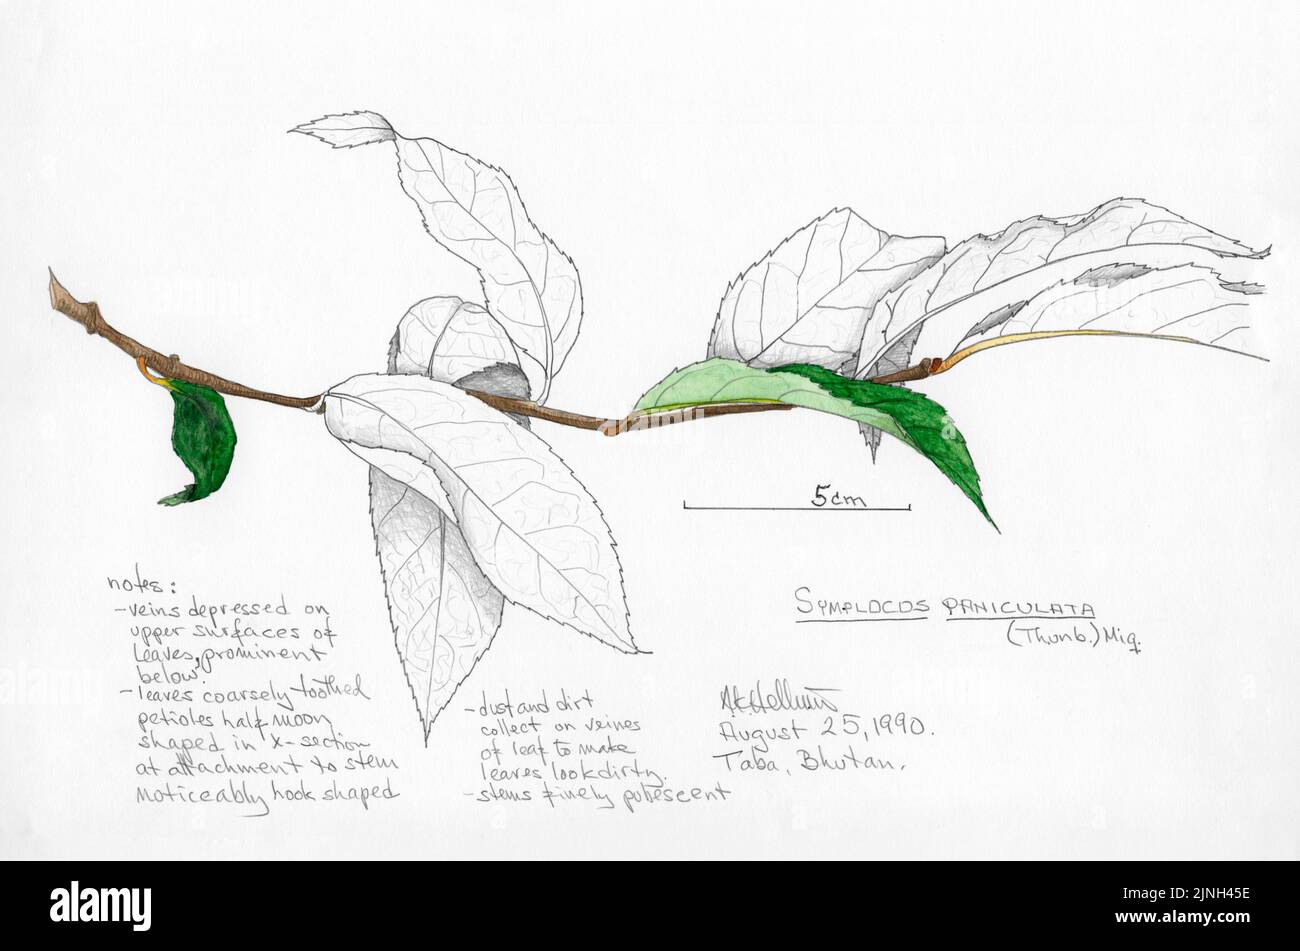 Symplocos paniculata (Thunb.) Mig Taba, Bhutan August 25, 1990 - veins depressed on upper surfaces of leaves, prominent below - leaves coarsely toothe Stock Photo